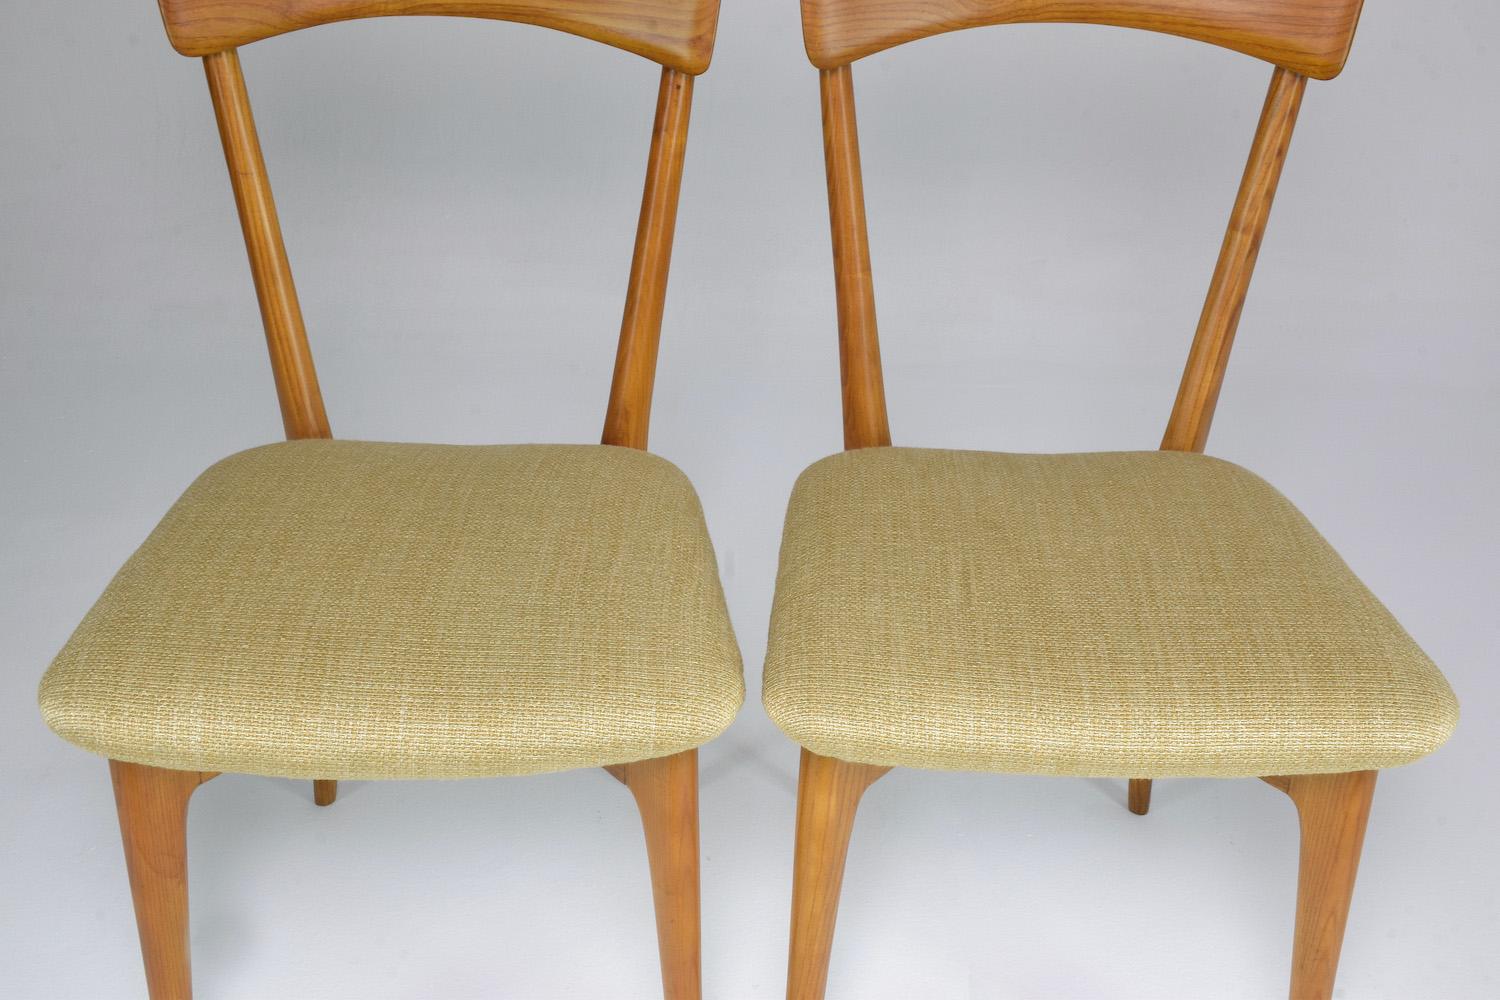 Upholstery 1950's Italian Chairs by Ico and Luisa Parisi for Ariberto Colombo, Set of Two